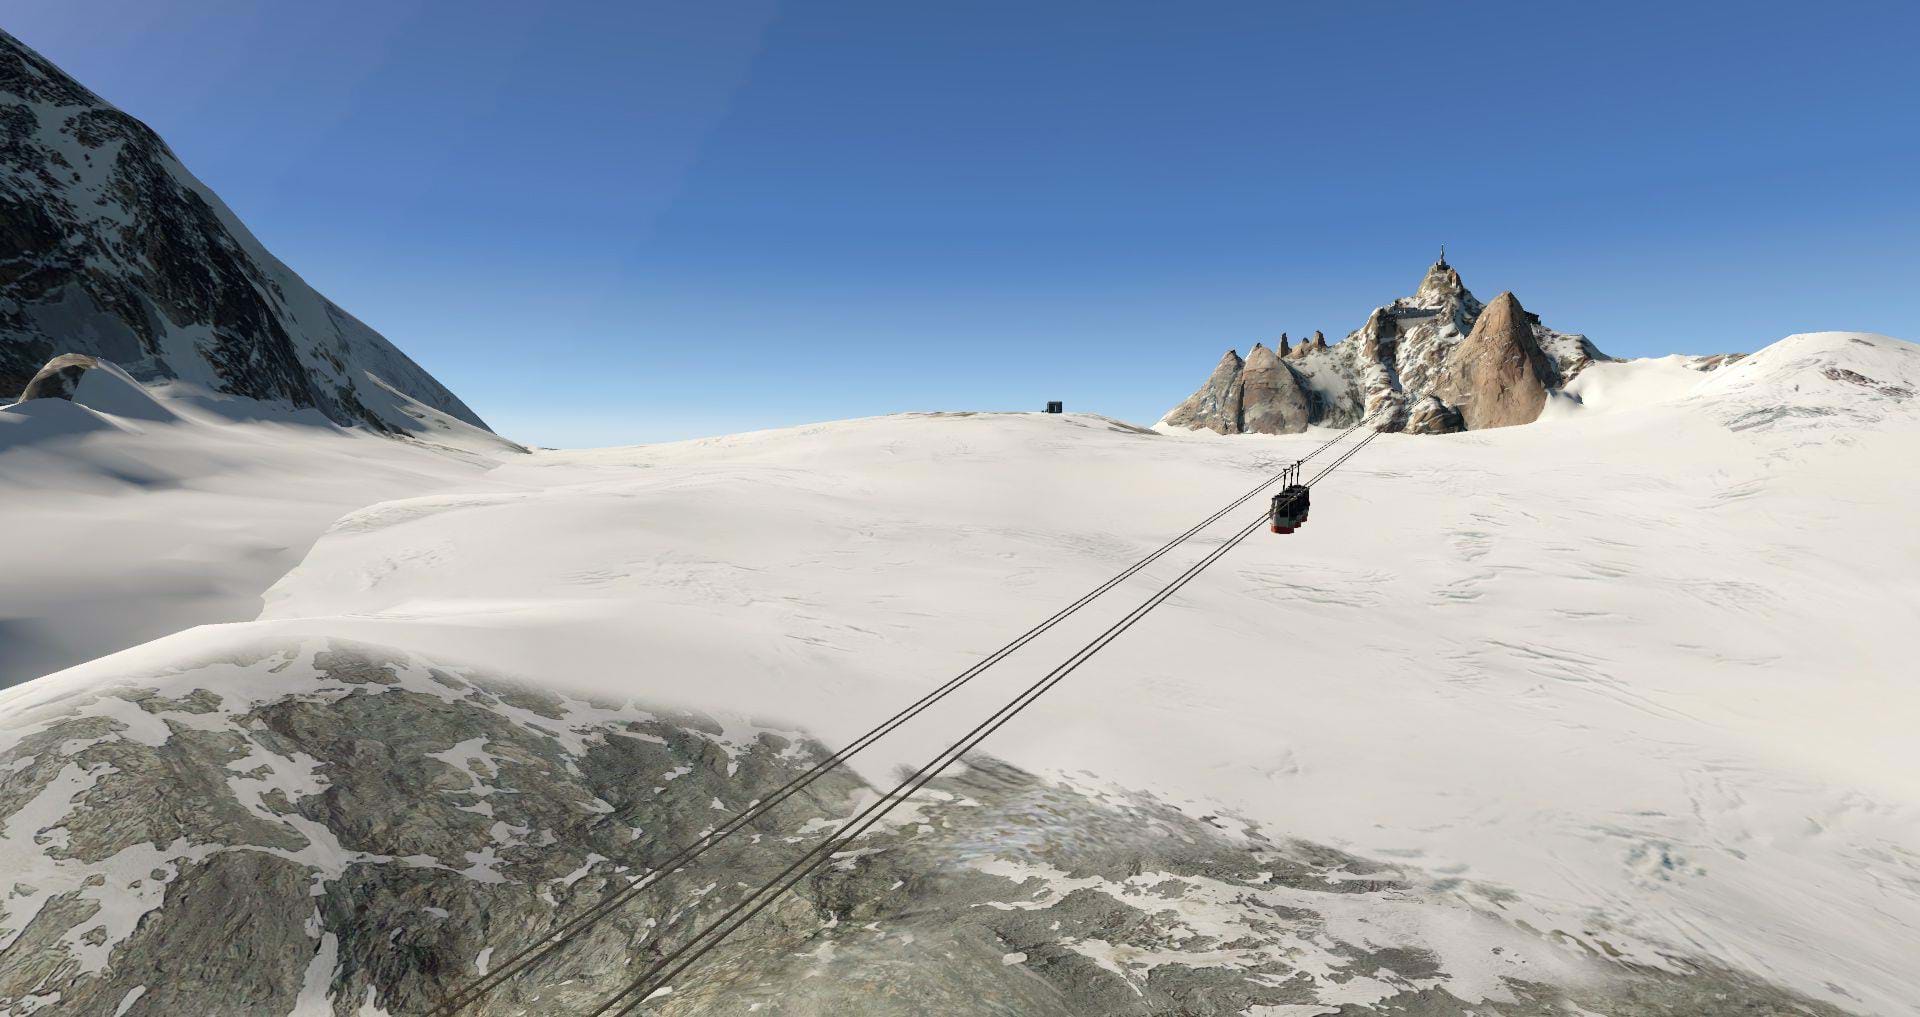 Frank Dainese and Fabio Bellini Mont Blanc for X-Plane 11